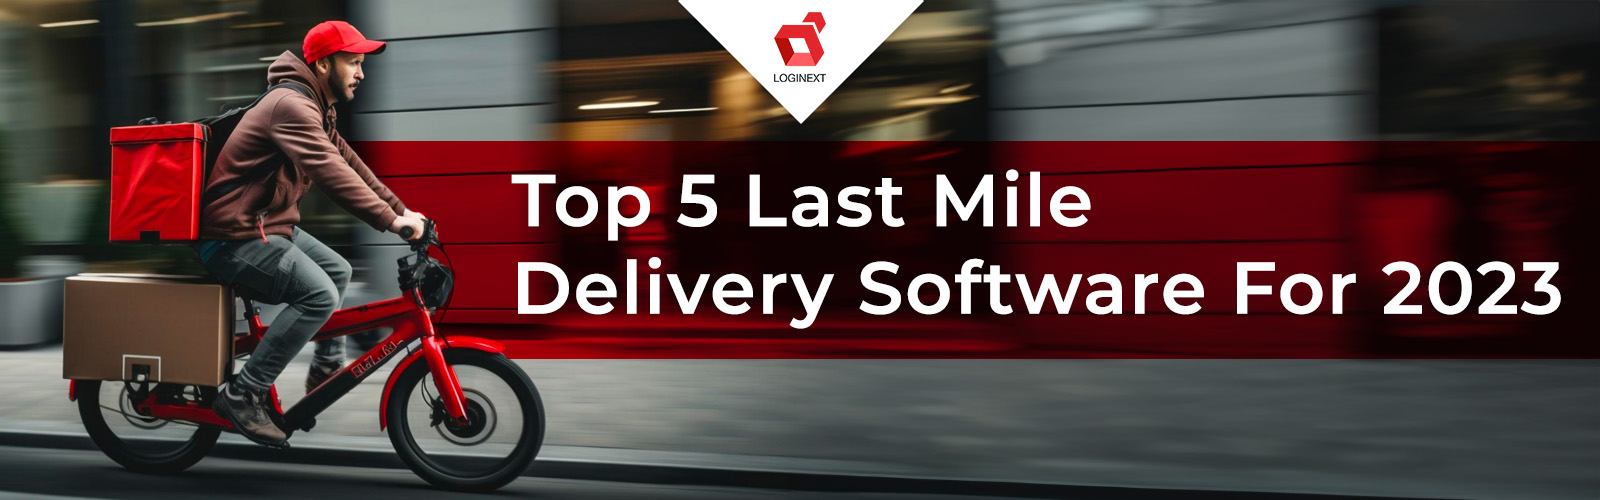 Top 5 Last-mile Delivery Software for 2023